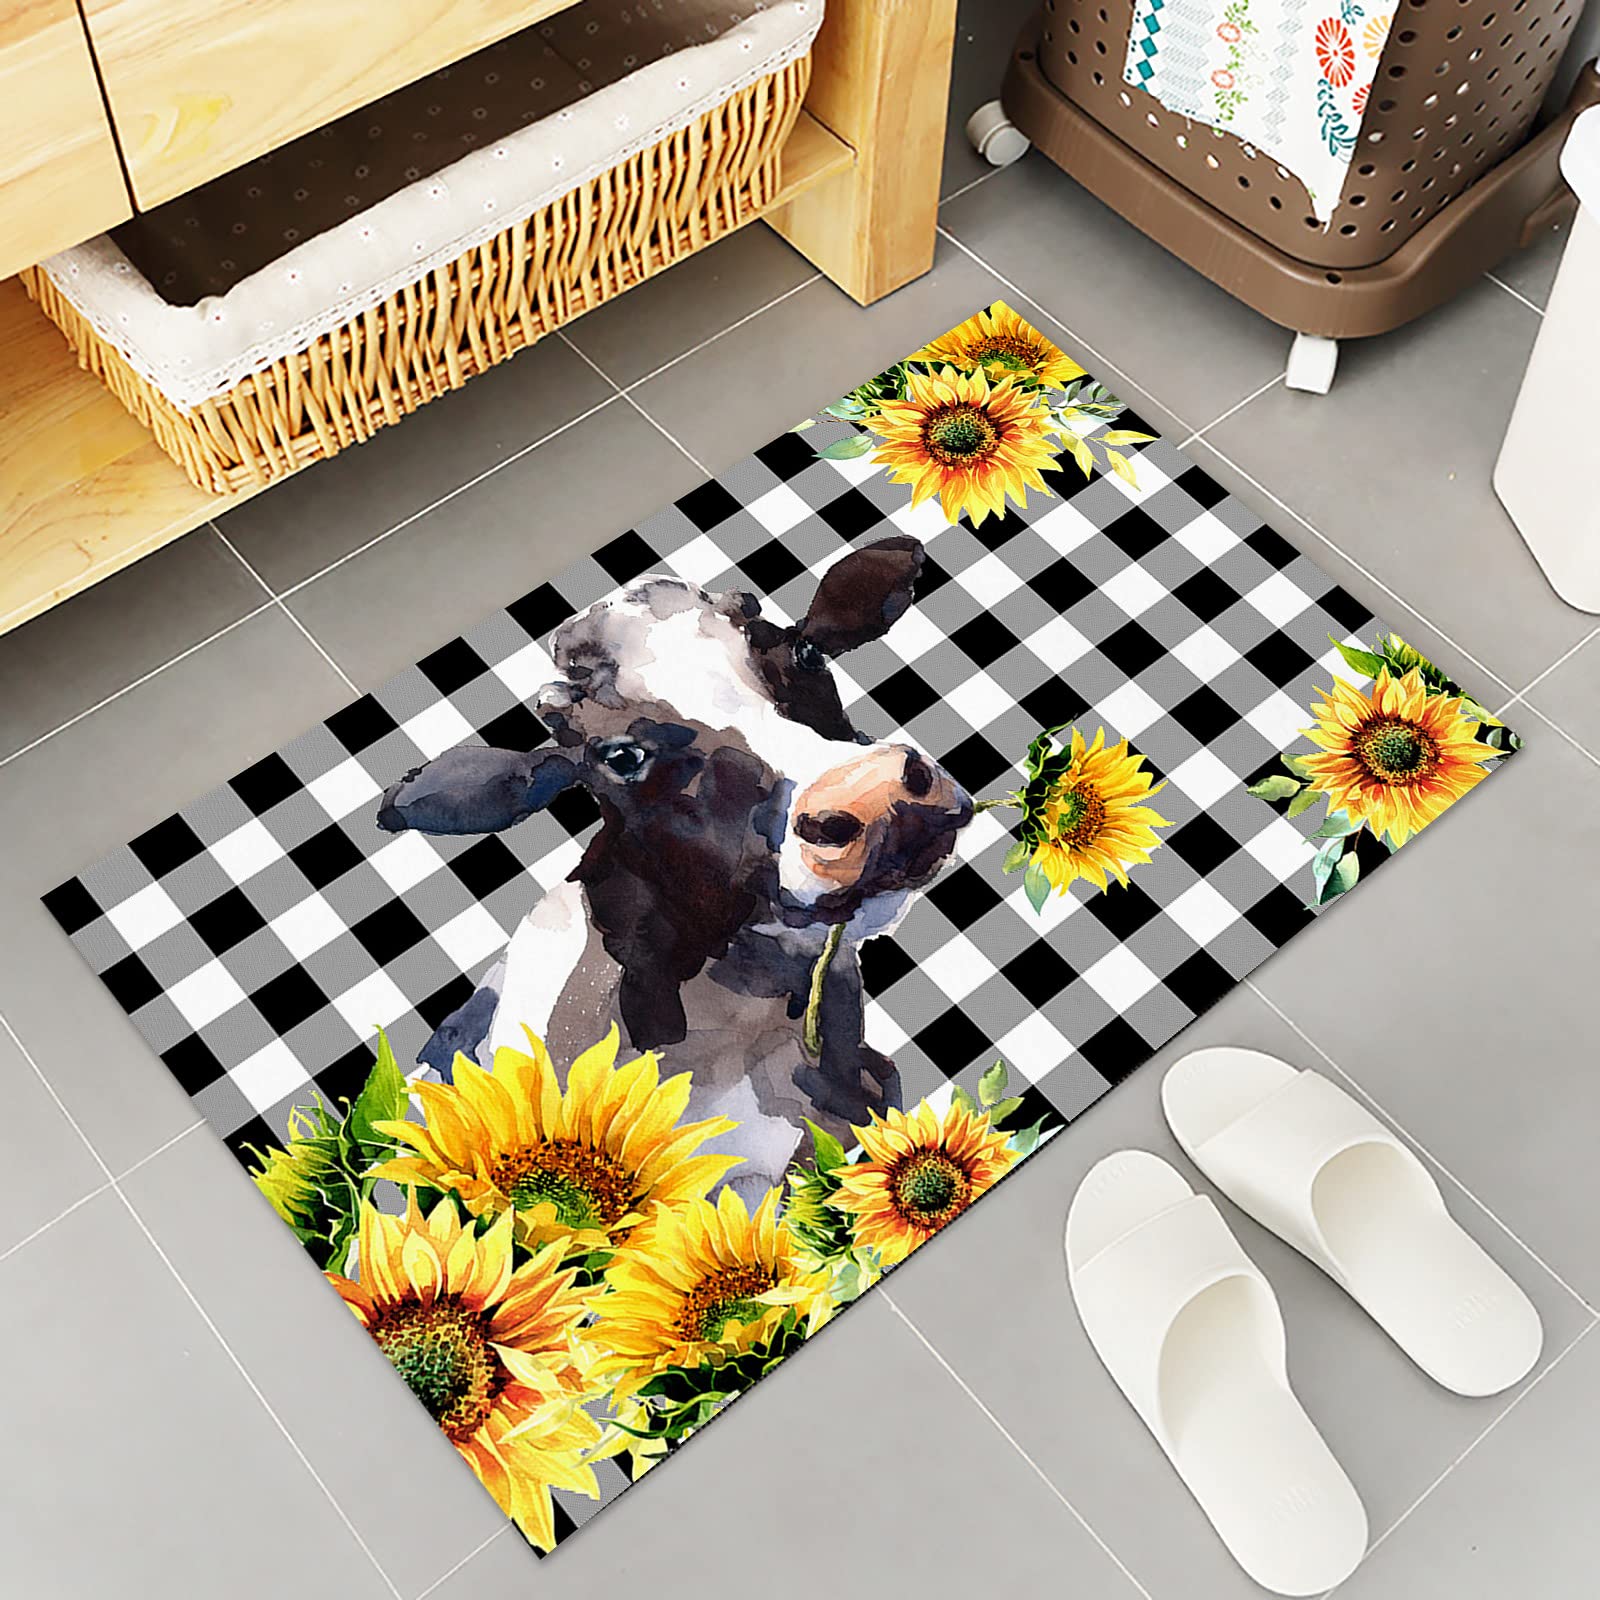 Beauty Decor 2 Piece Kitchen Mats Cushioned Kitchen Rug Farm Cow and Sunflower Black and White Buffalo Plaid Non Slip Thick Floor Comfort Mat Sets with Runner